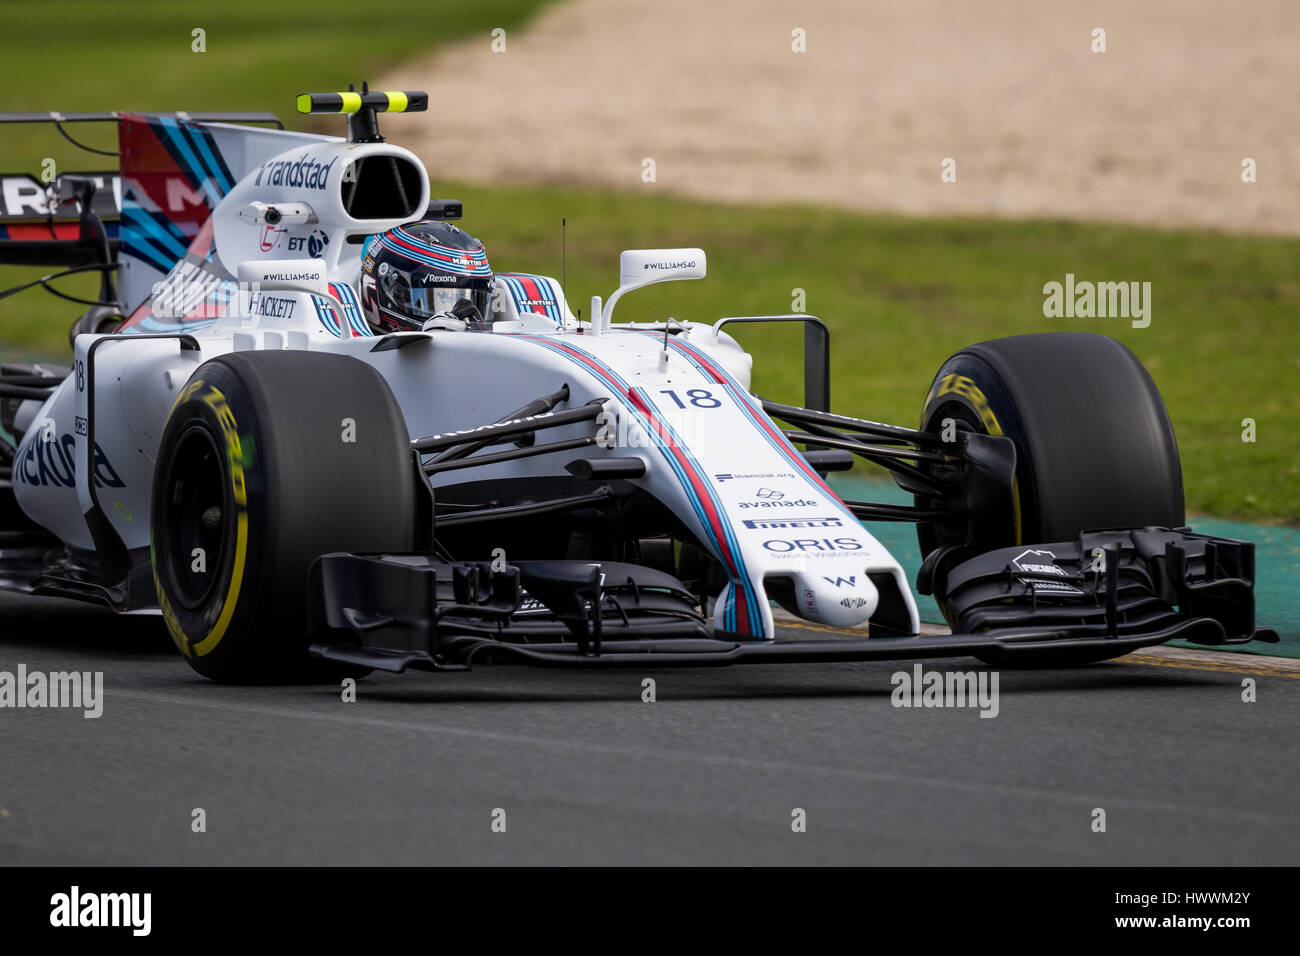 Melbourne, Australia. 24th March, 2017. Lance STROLL  18 driving for WILLIAMS MARTINI RACING during the 2017 Formula 1 Rolex Australian Grand Prix, Australia on March 24 2017. Credit: Dave Hewison Sports/Alamy Live News Stock Photo